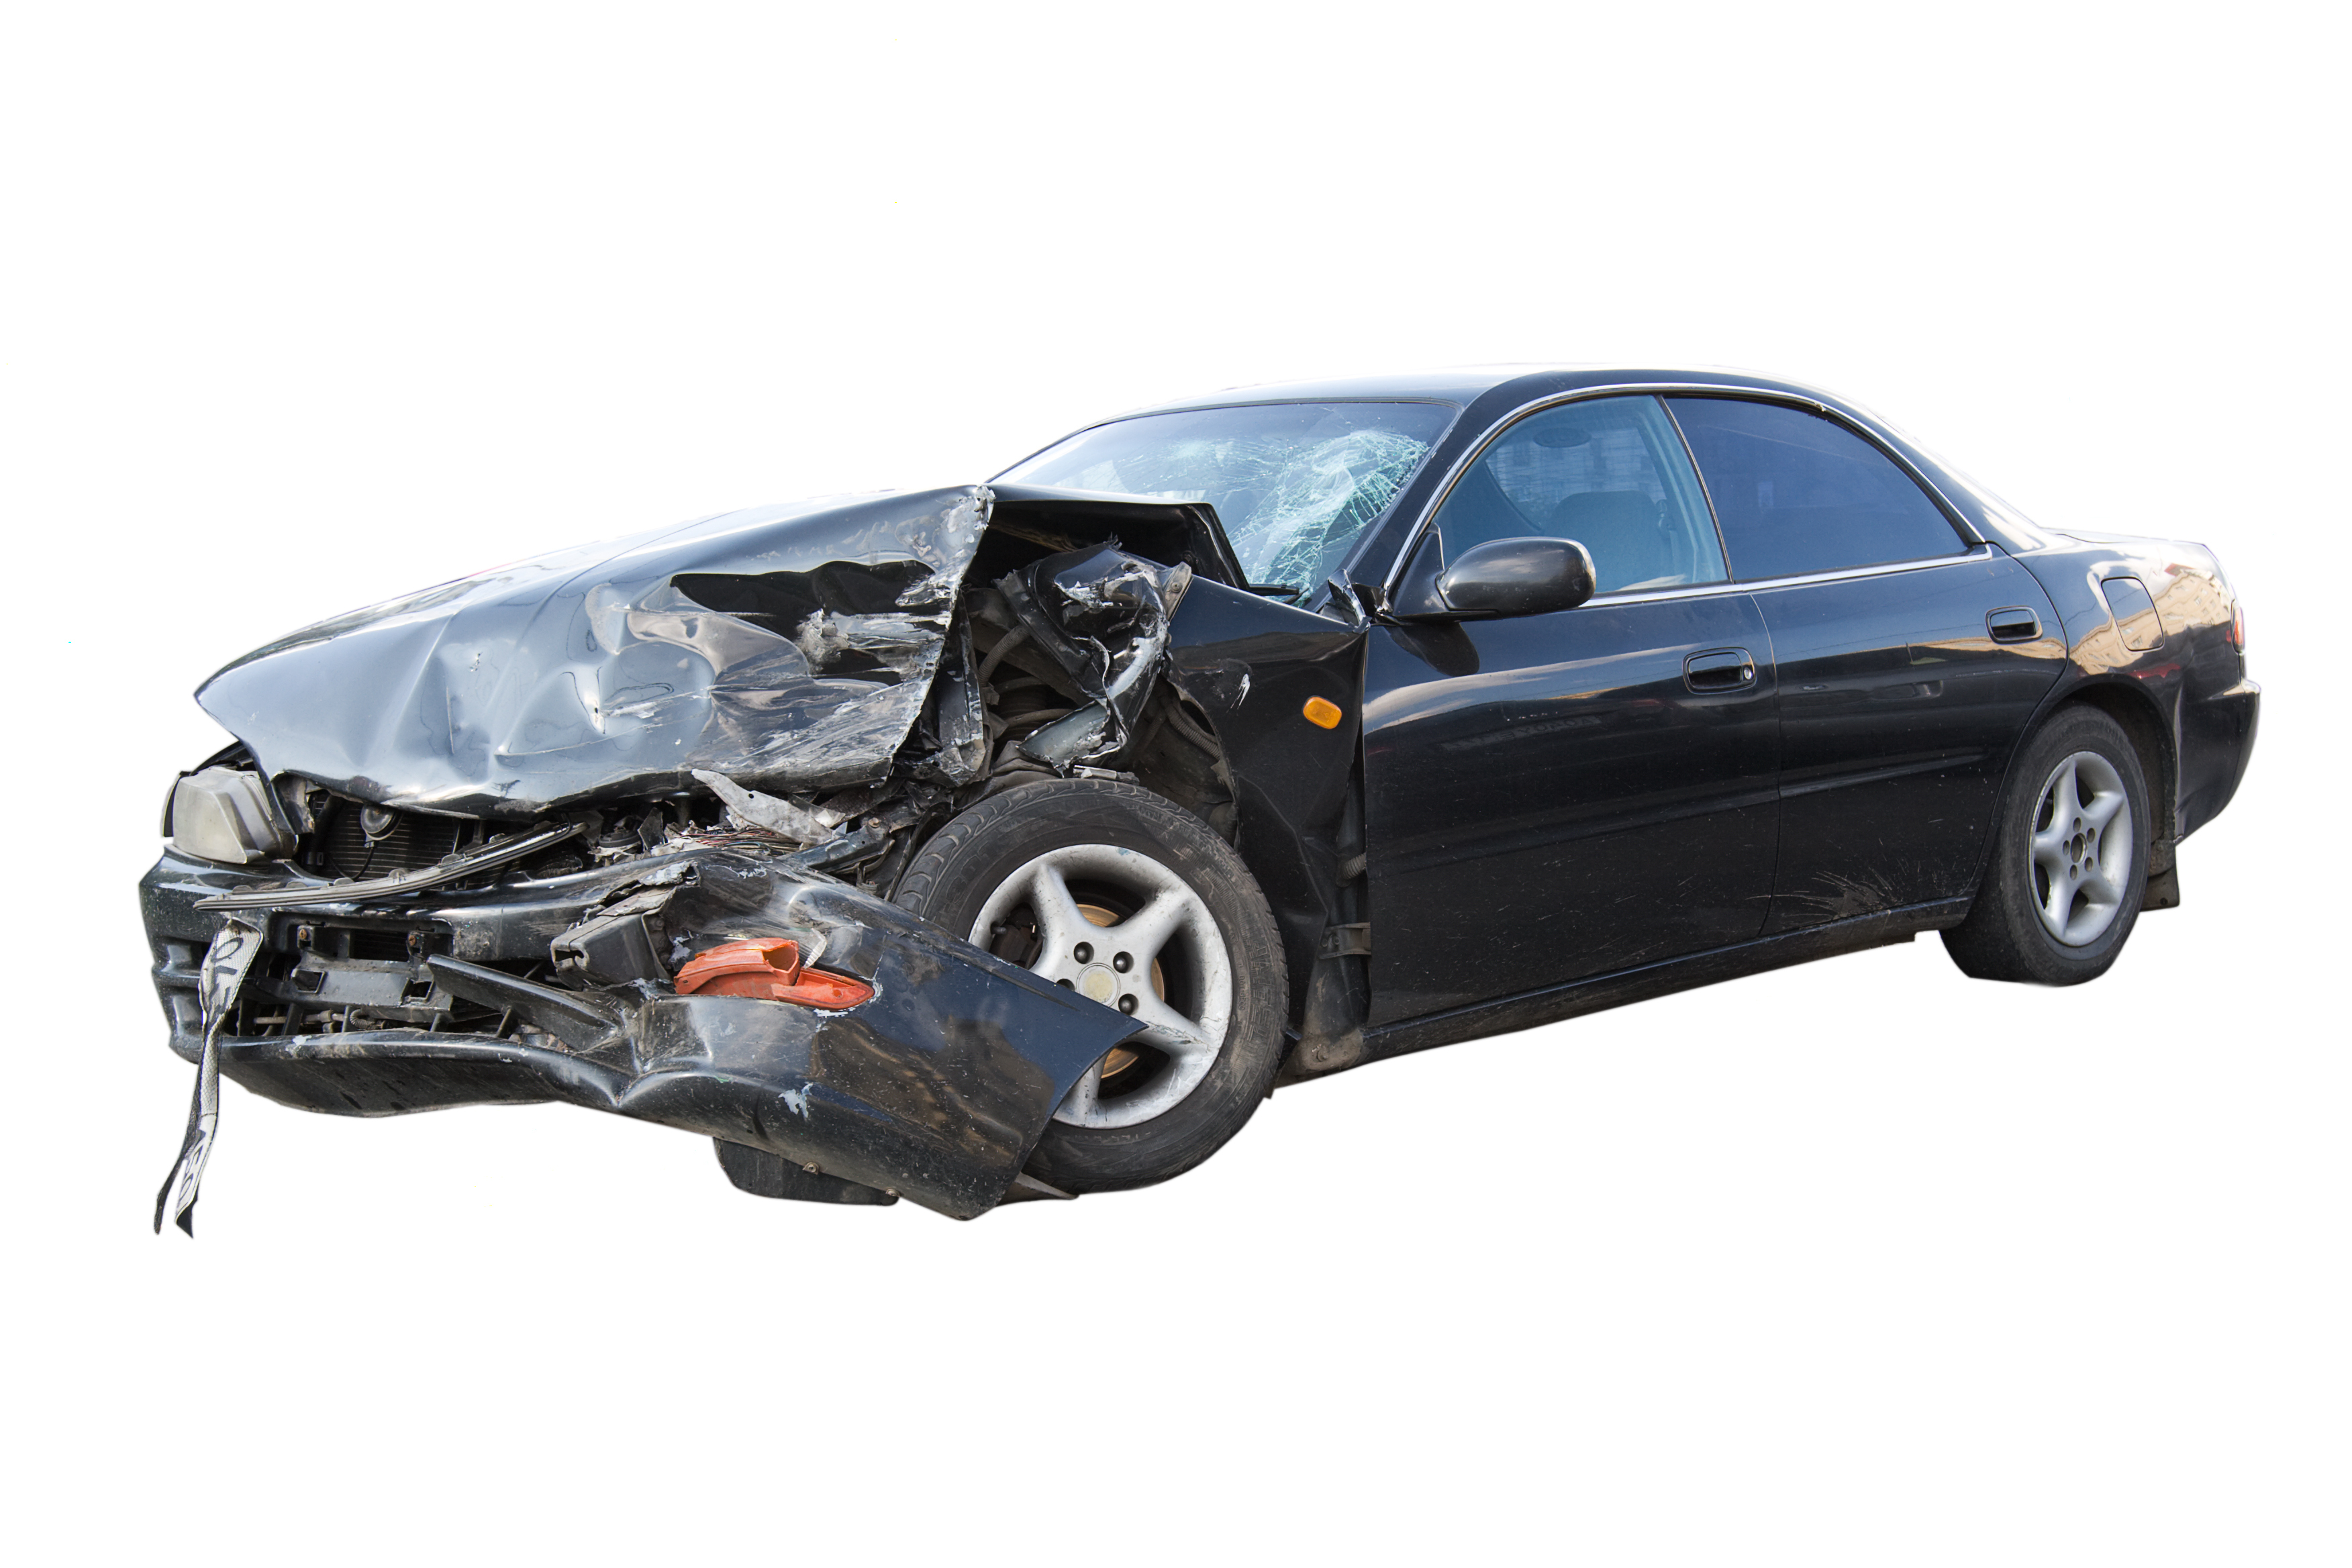 A severely damaged car. | Source: Shutterstock